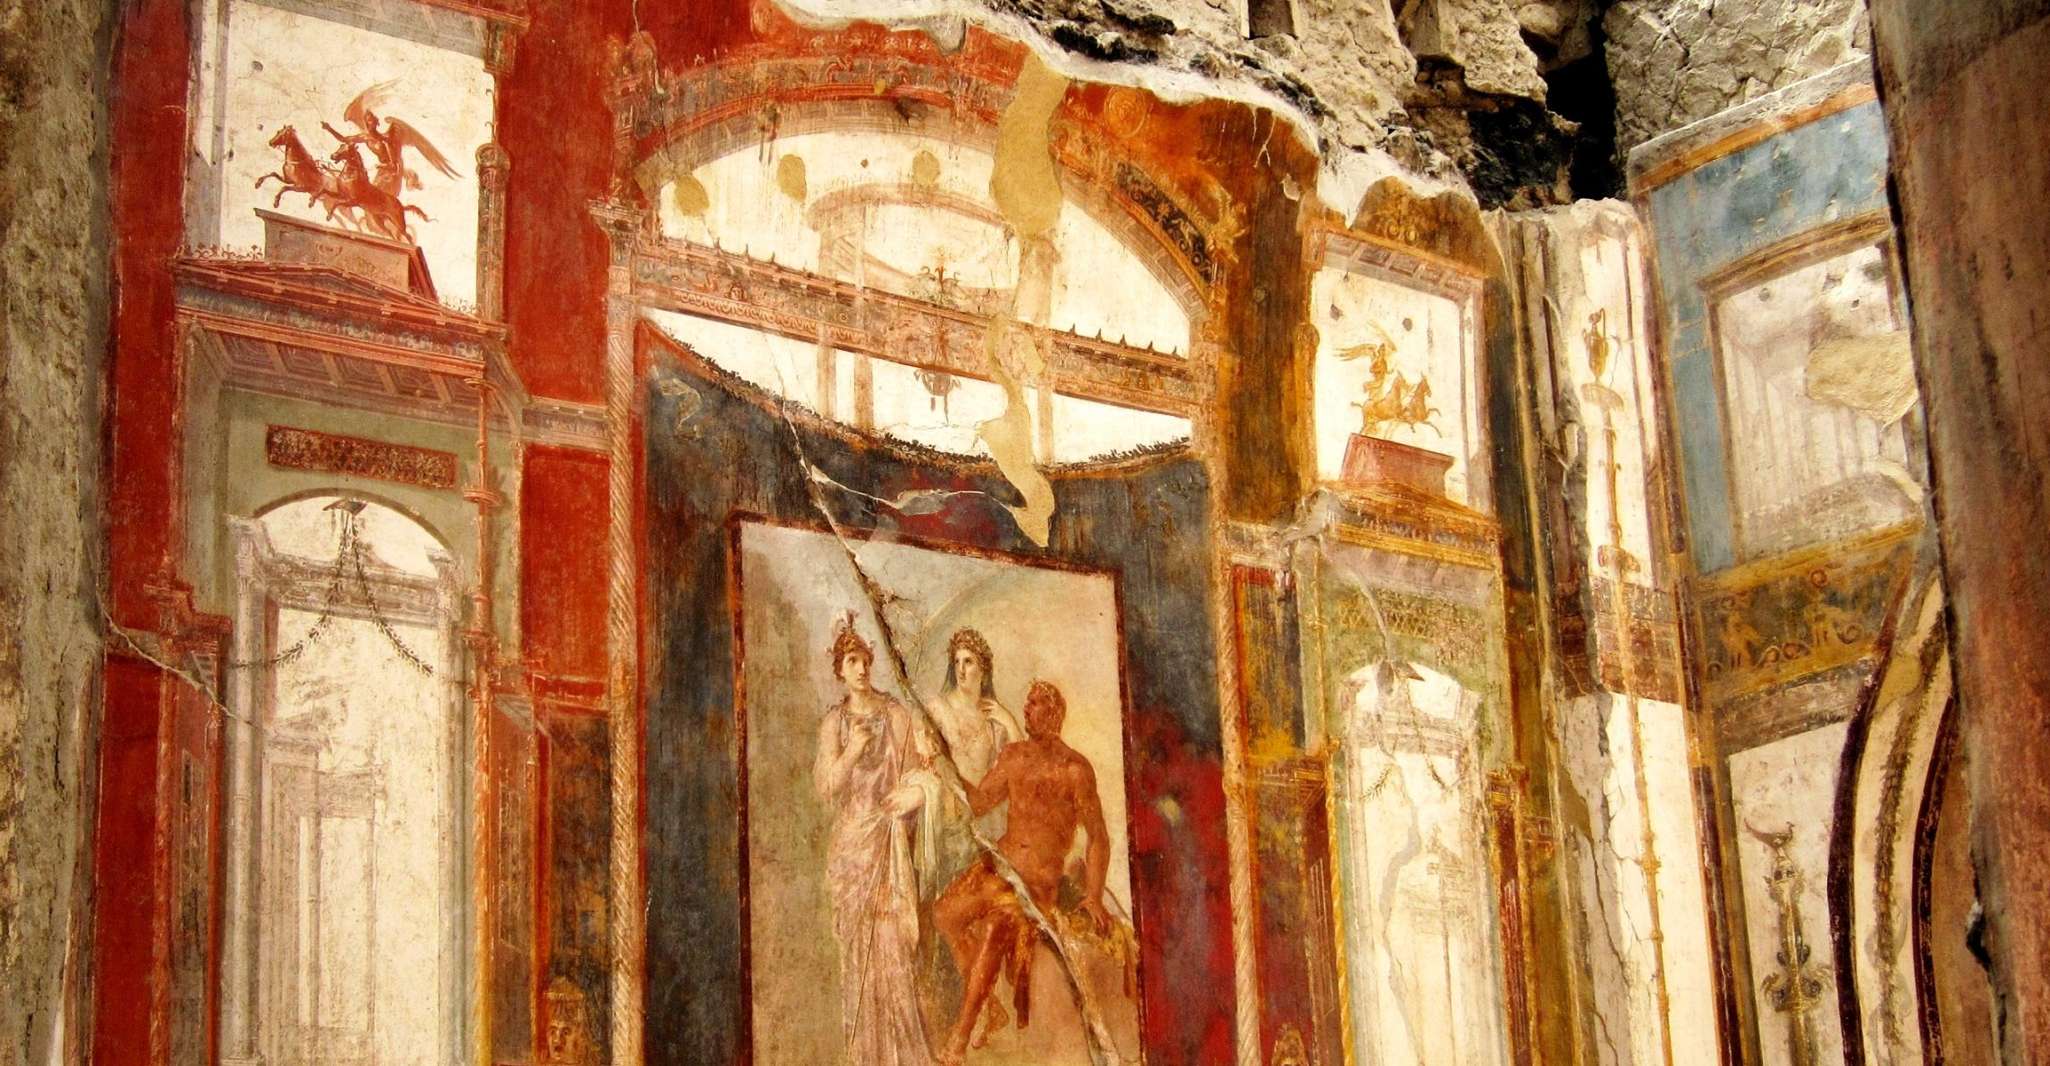 Skip the Line in Herculaneum - Half Day Group Tour - Housity